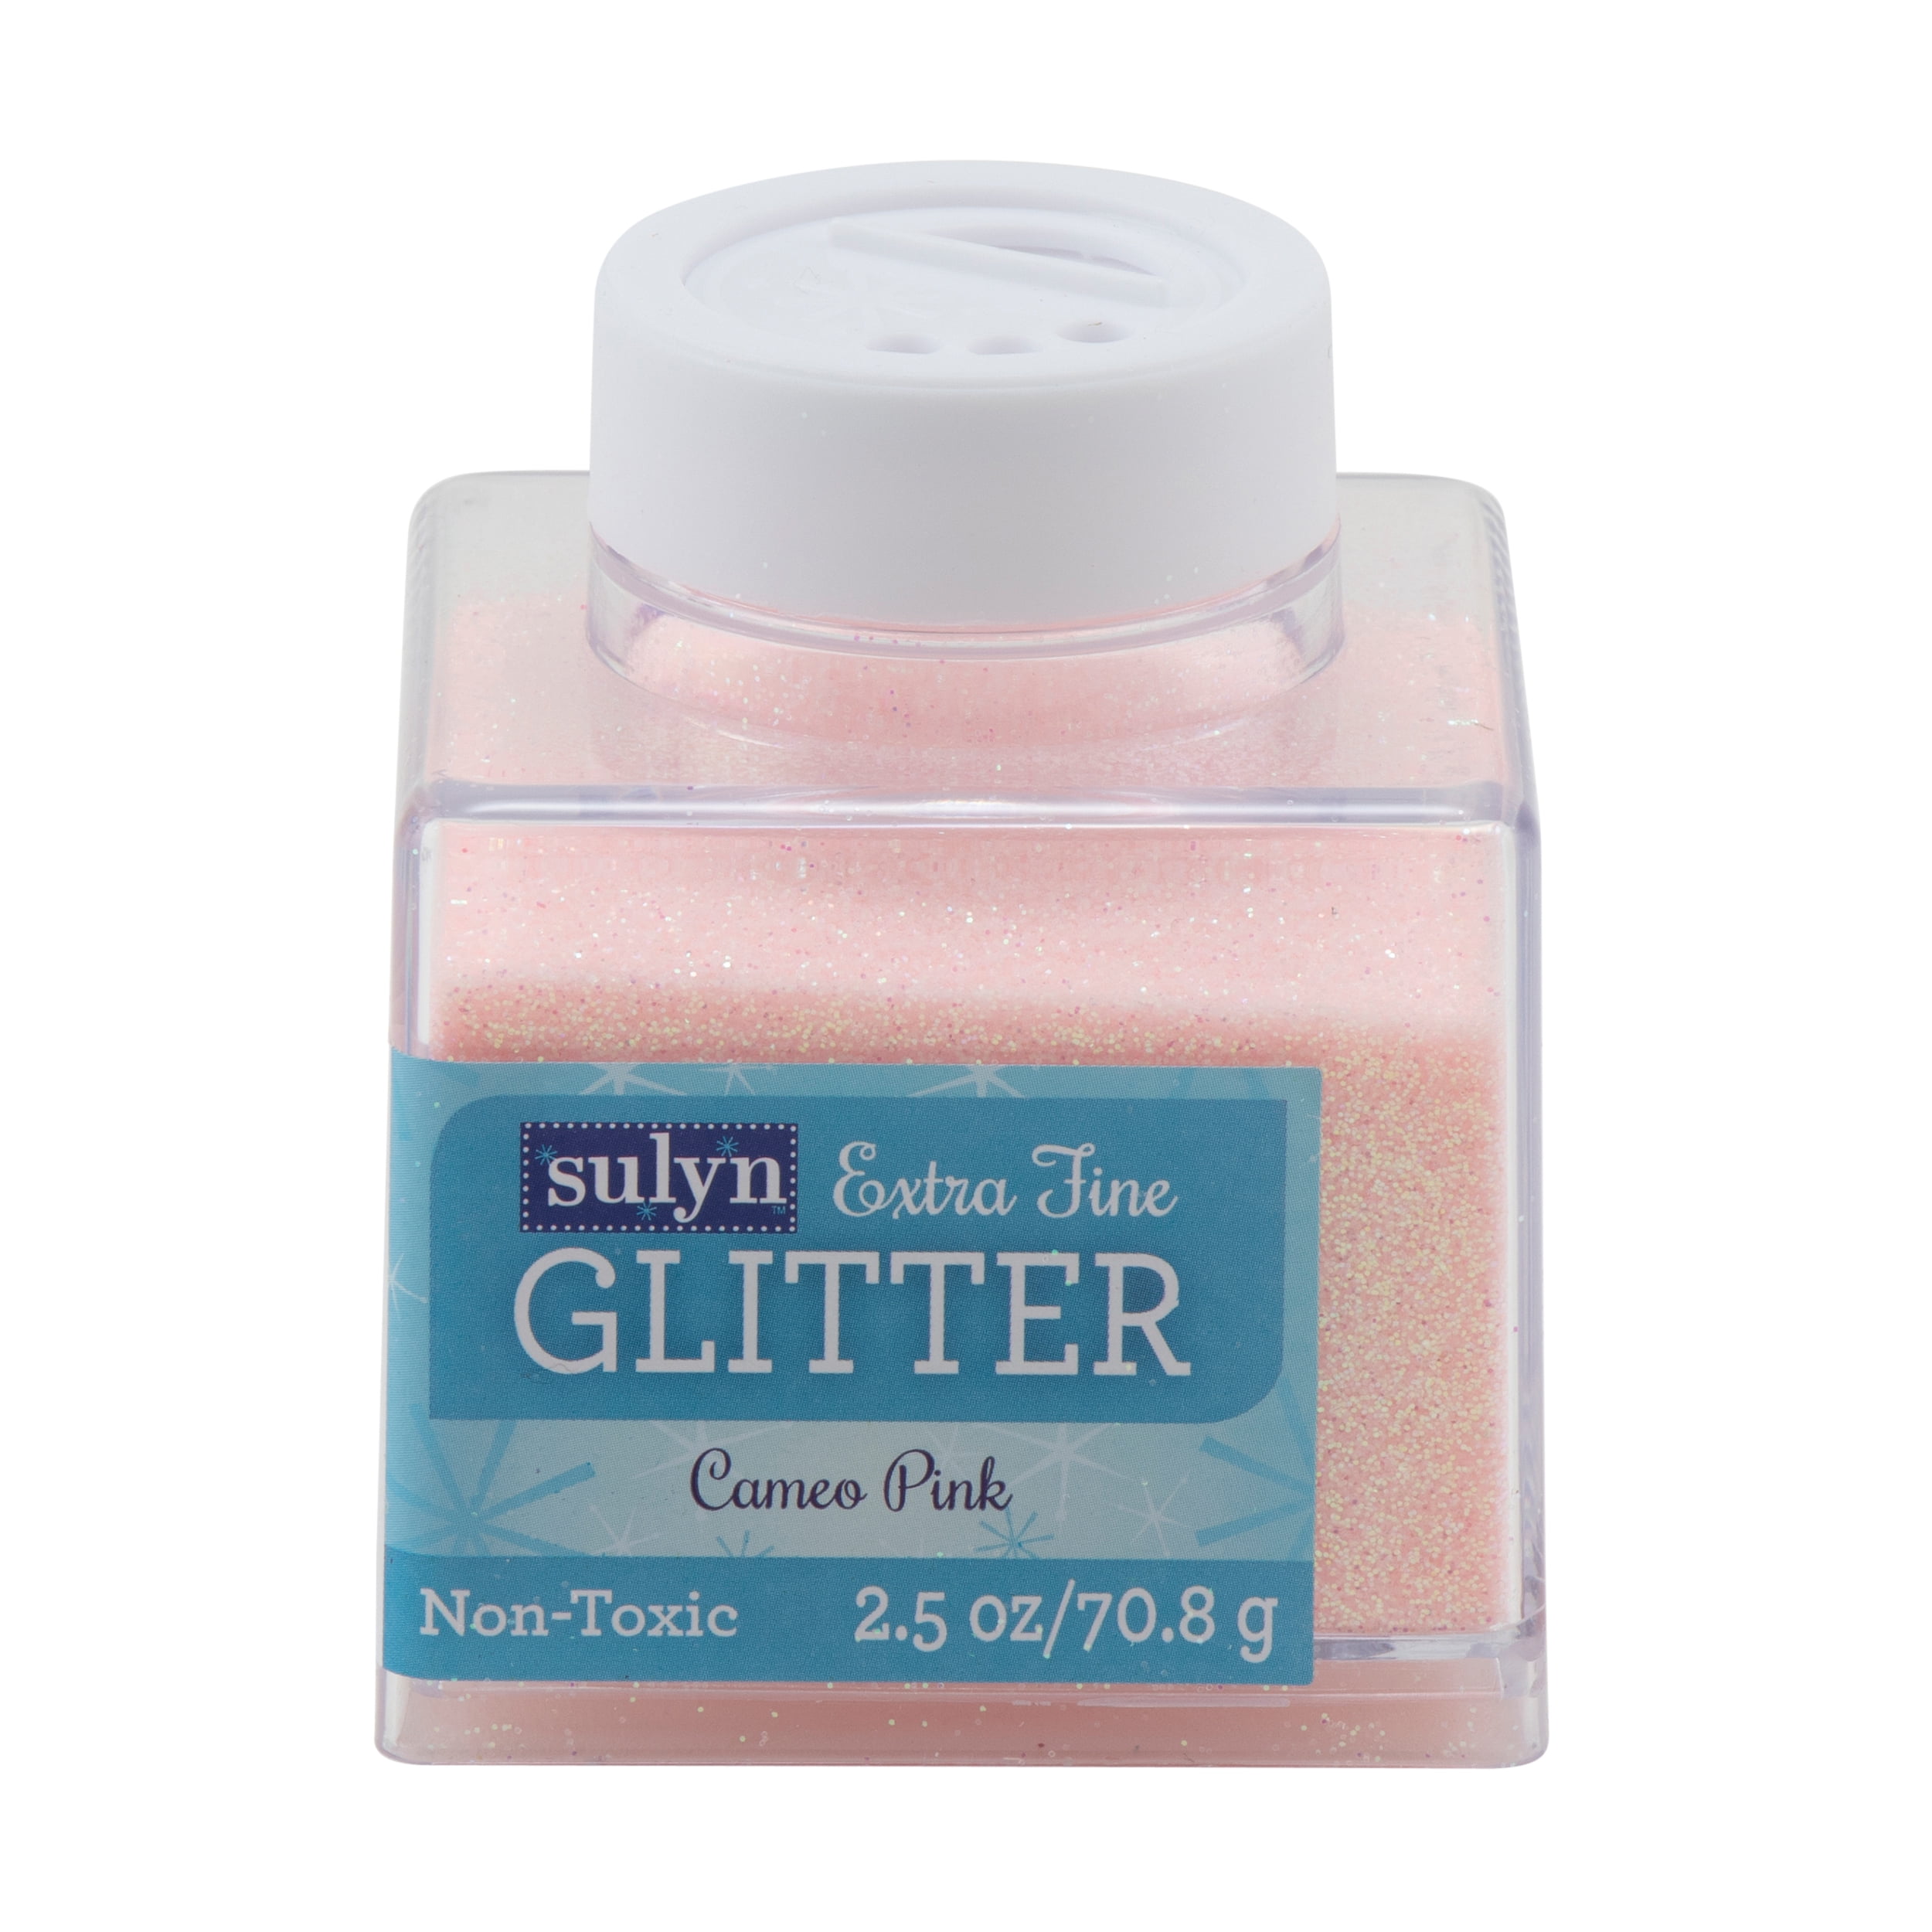 Sulyn Extra Fine Glitter for Crafts, Sapphire Blue, 2.5 oz